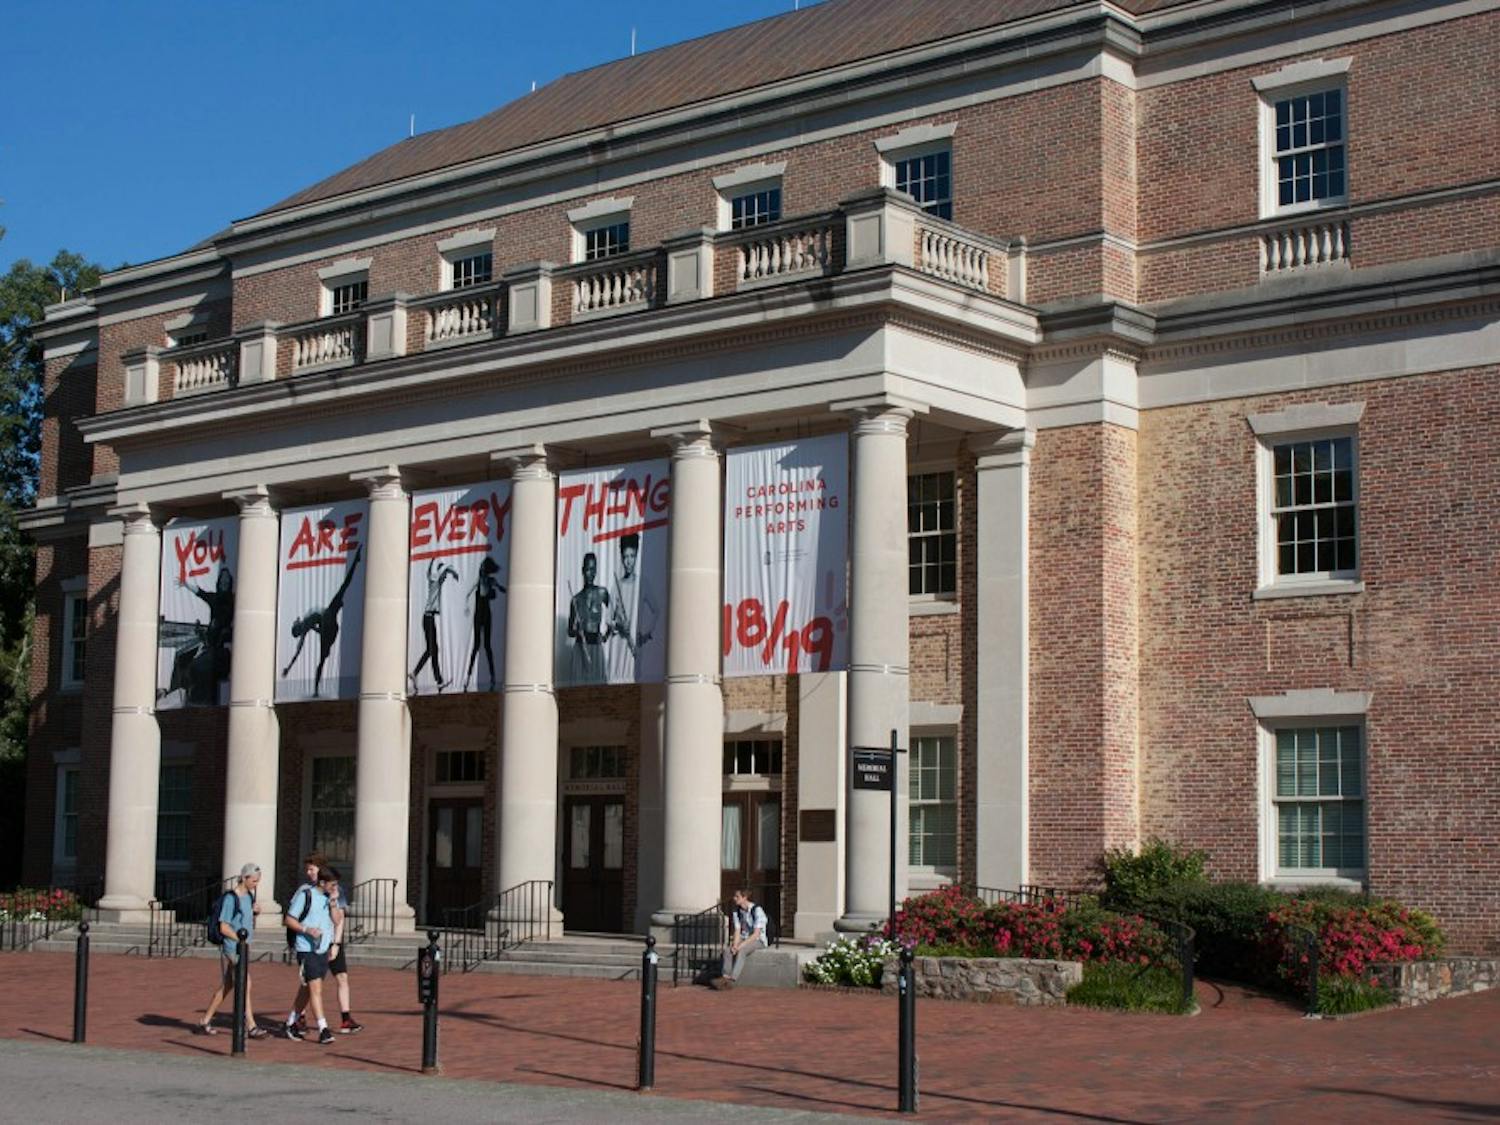 Memorial Hall is Carolina Performing Arts' largest venue. Carolina Performing Arts plans to implement sensory-friendly systems to make their productions more inclusive for patrons.&nbsp;